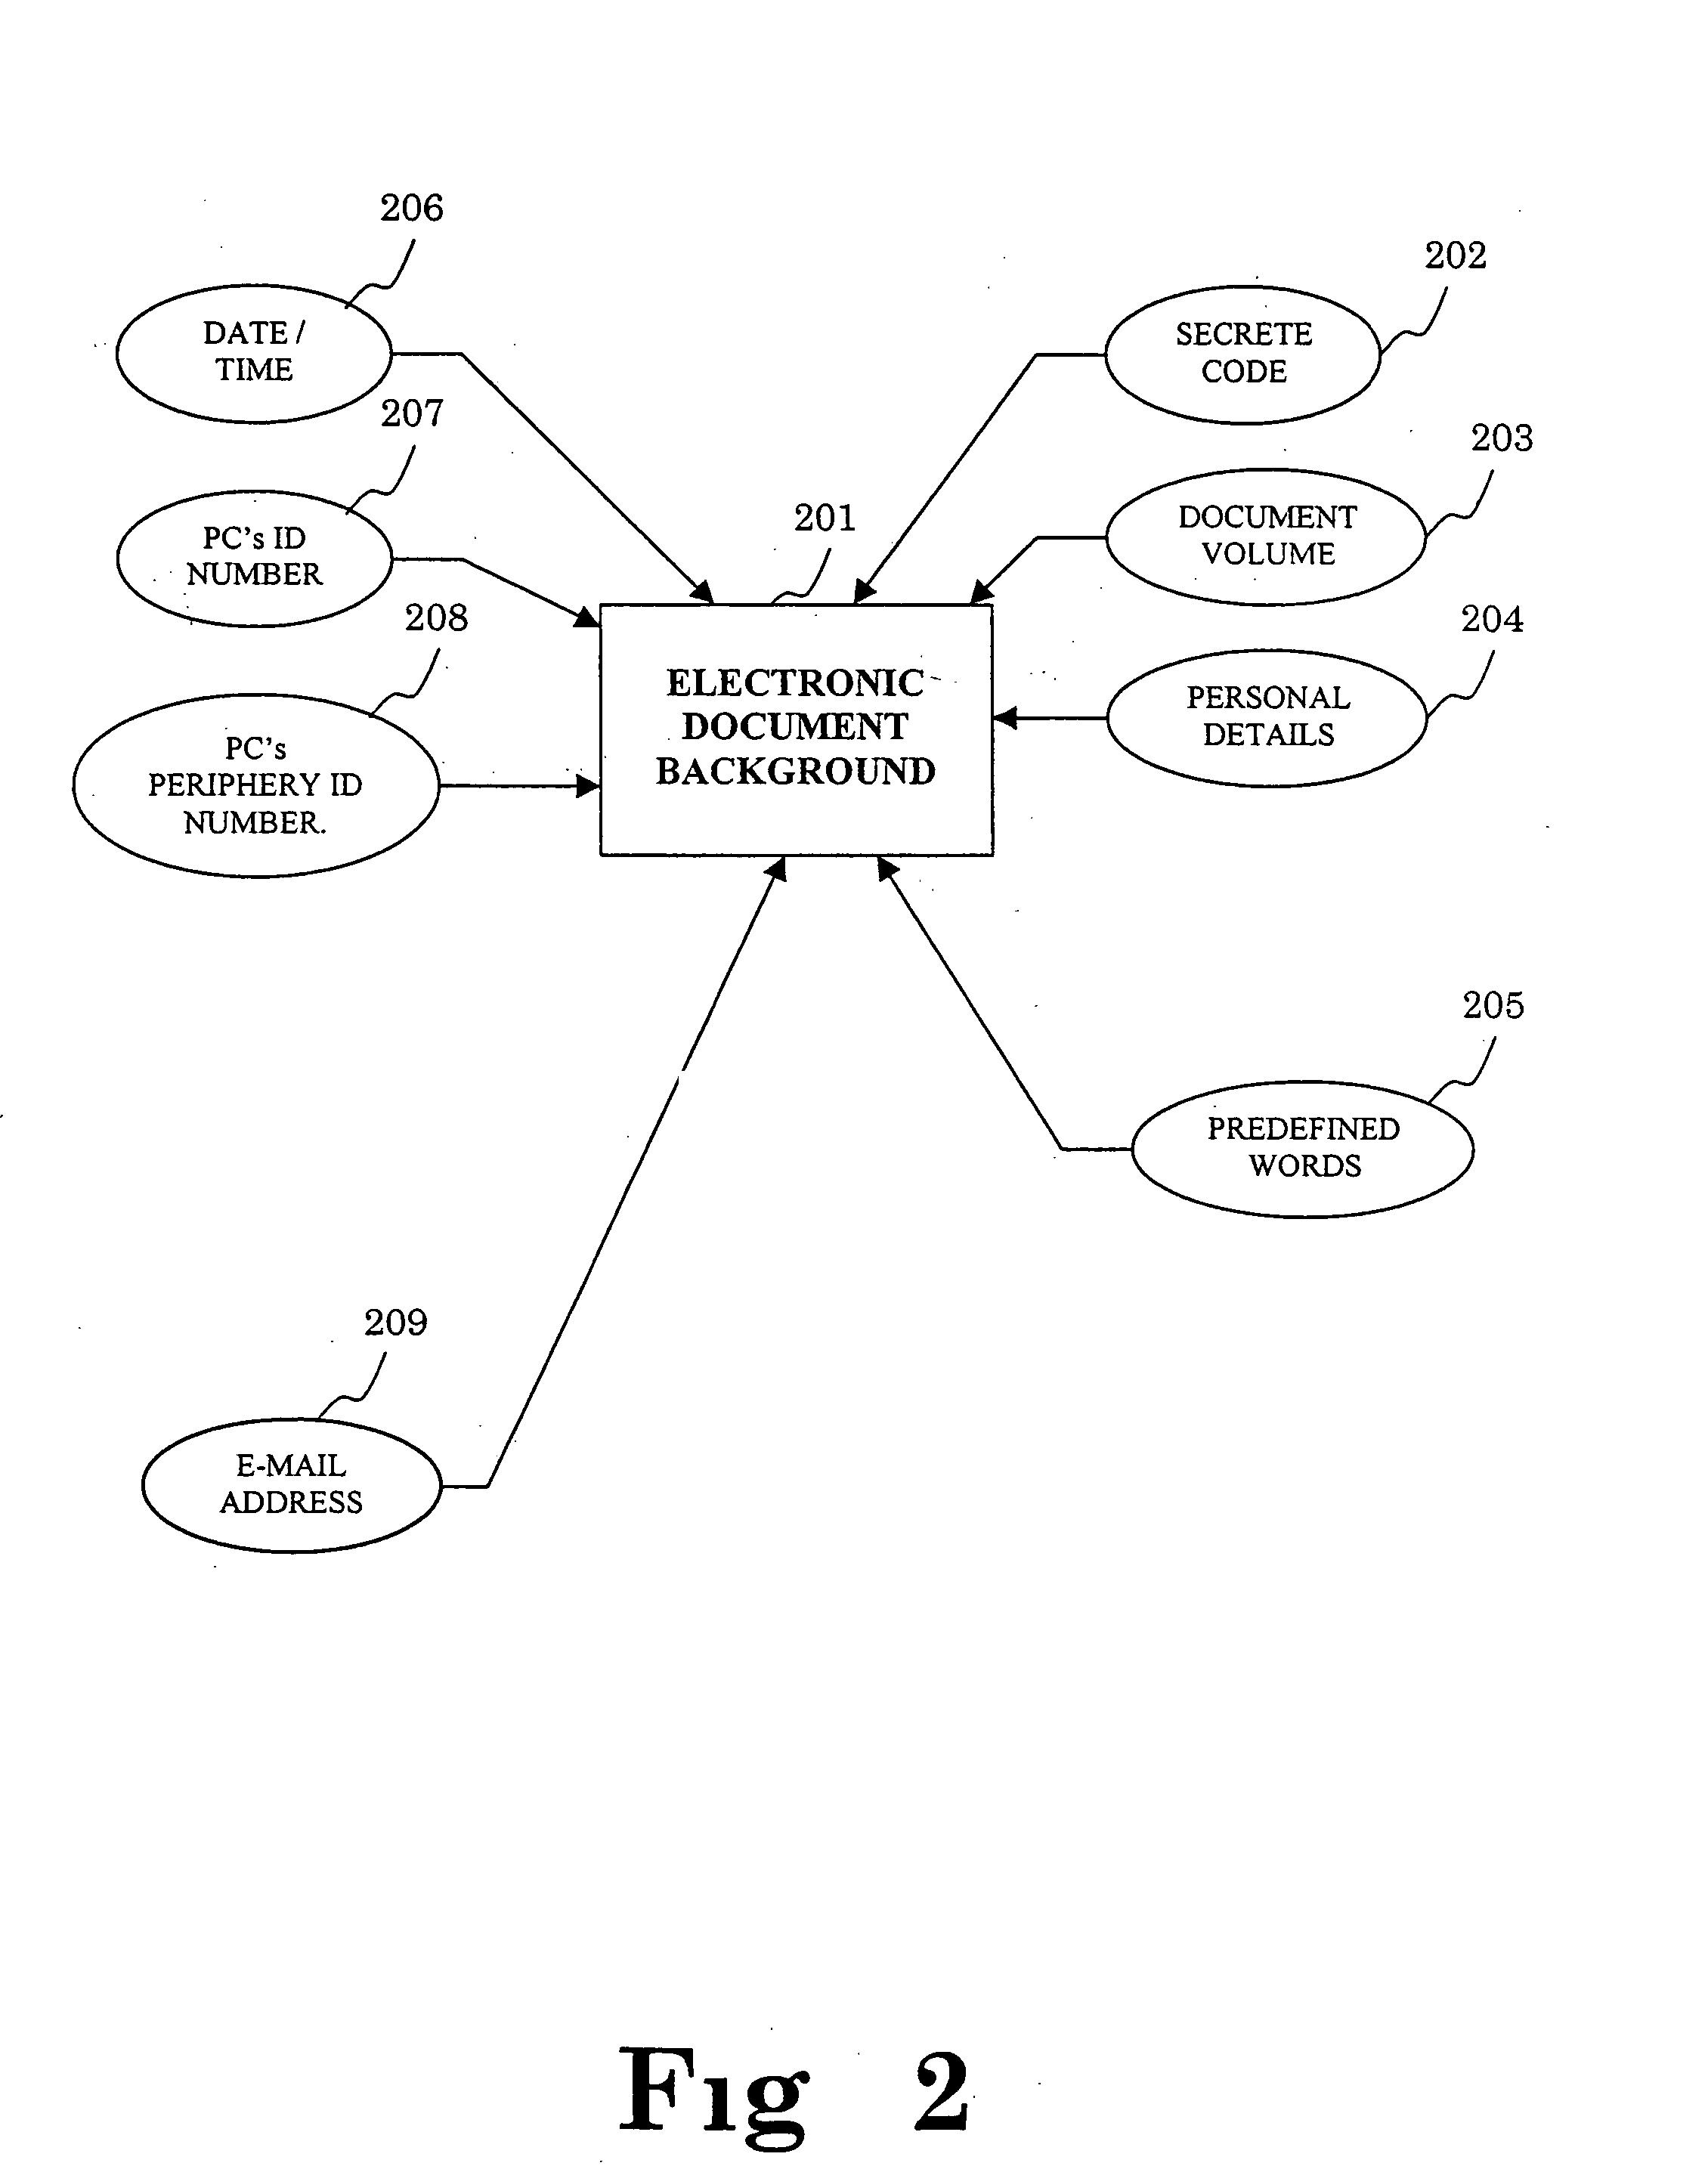 Method and system for assigning a background to a document and document having a background made according to the method and system